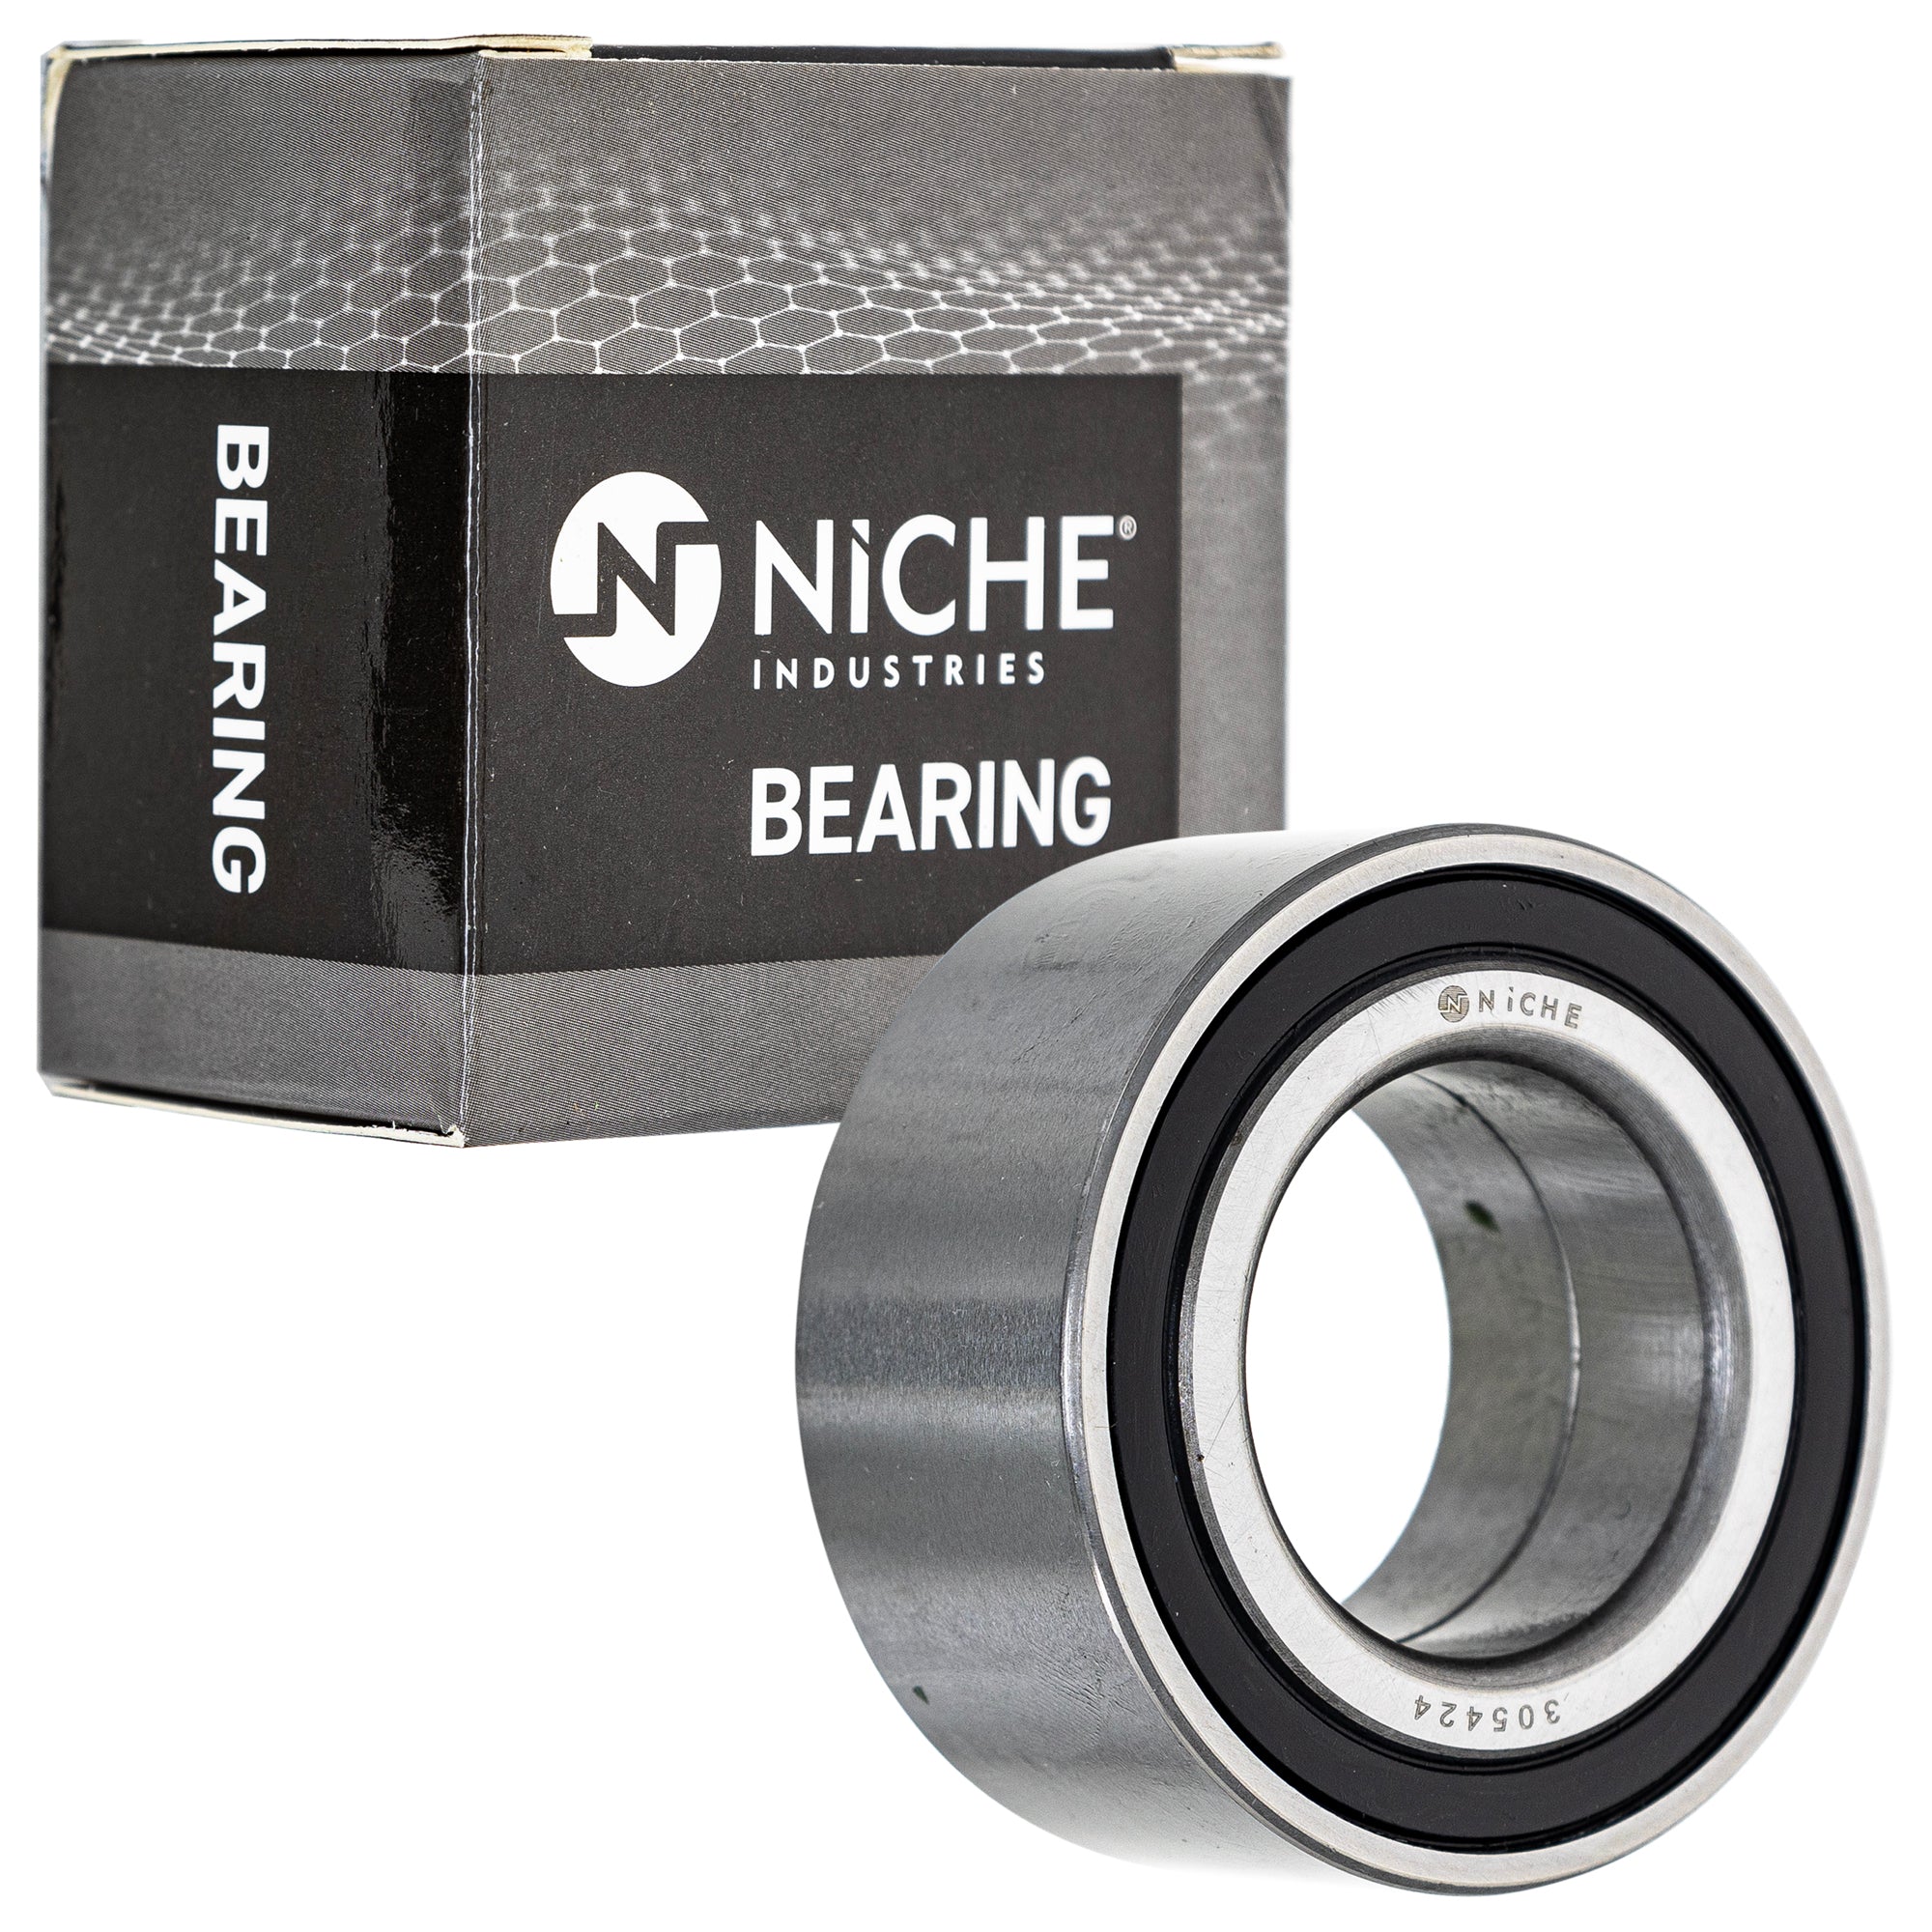 NICHE 519-CBB2255R Bearing & Seal Kit for zOTHER BRP Can-Am Ski-Doo